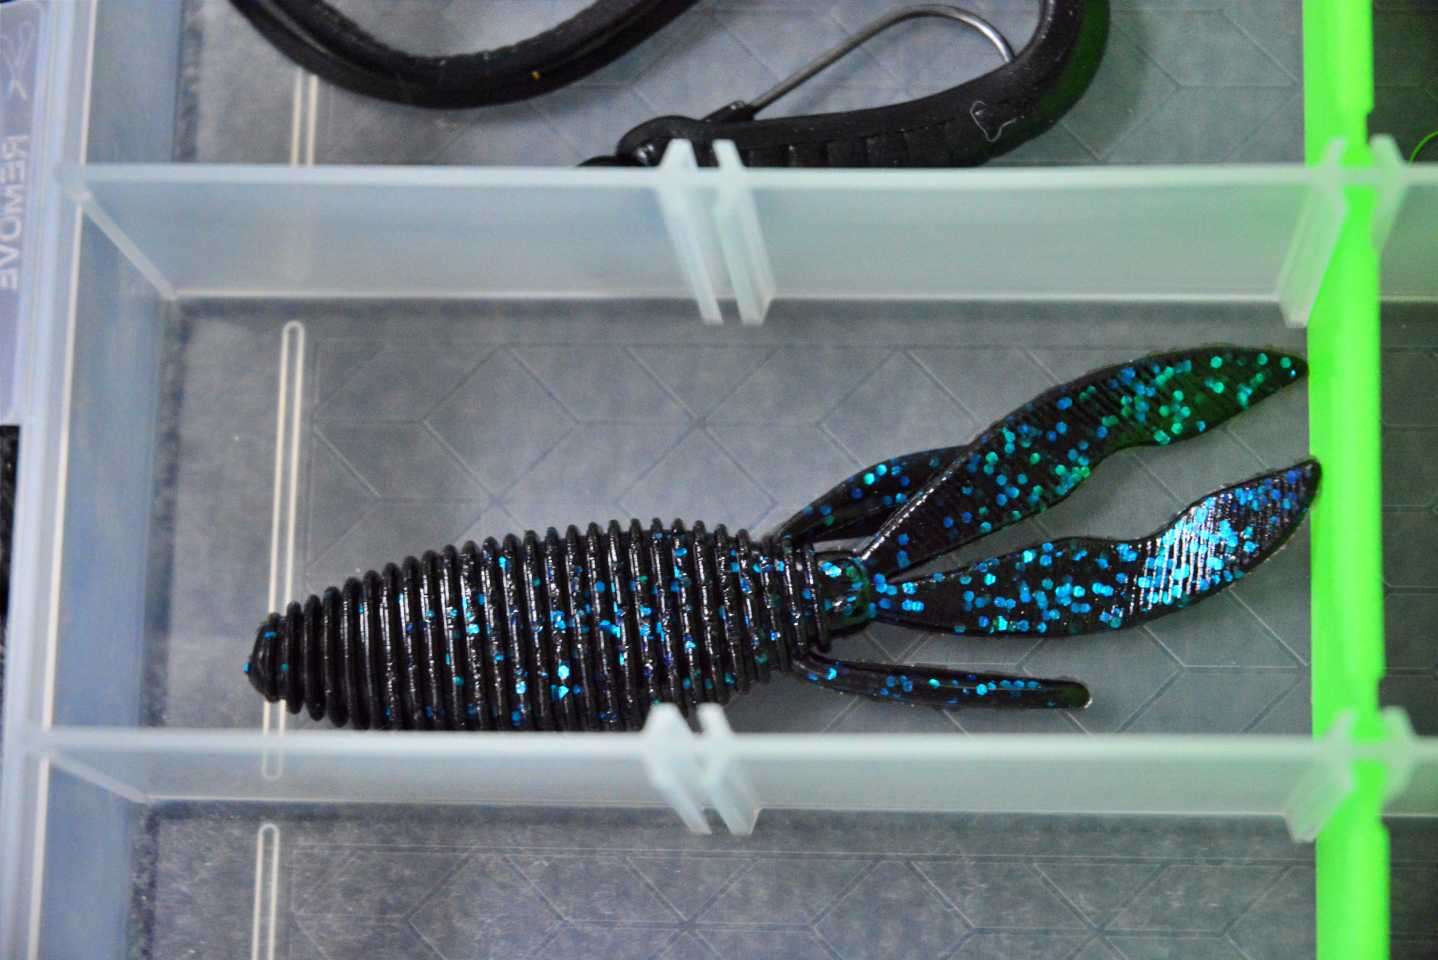 Specially cut tails generate a subtle kicking action on the fall, and a tapered body shape allows the bait to slip in and out of cover without getting tangled. A trough-style belly provides less resistance when setting the hook for better penetration. Black Blue Fleck is his color of choice. 